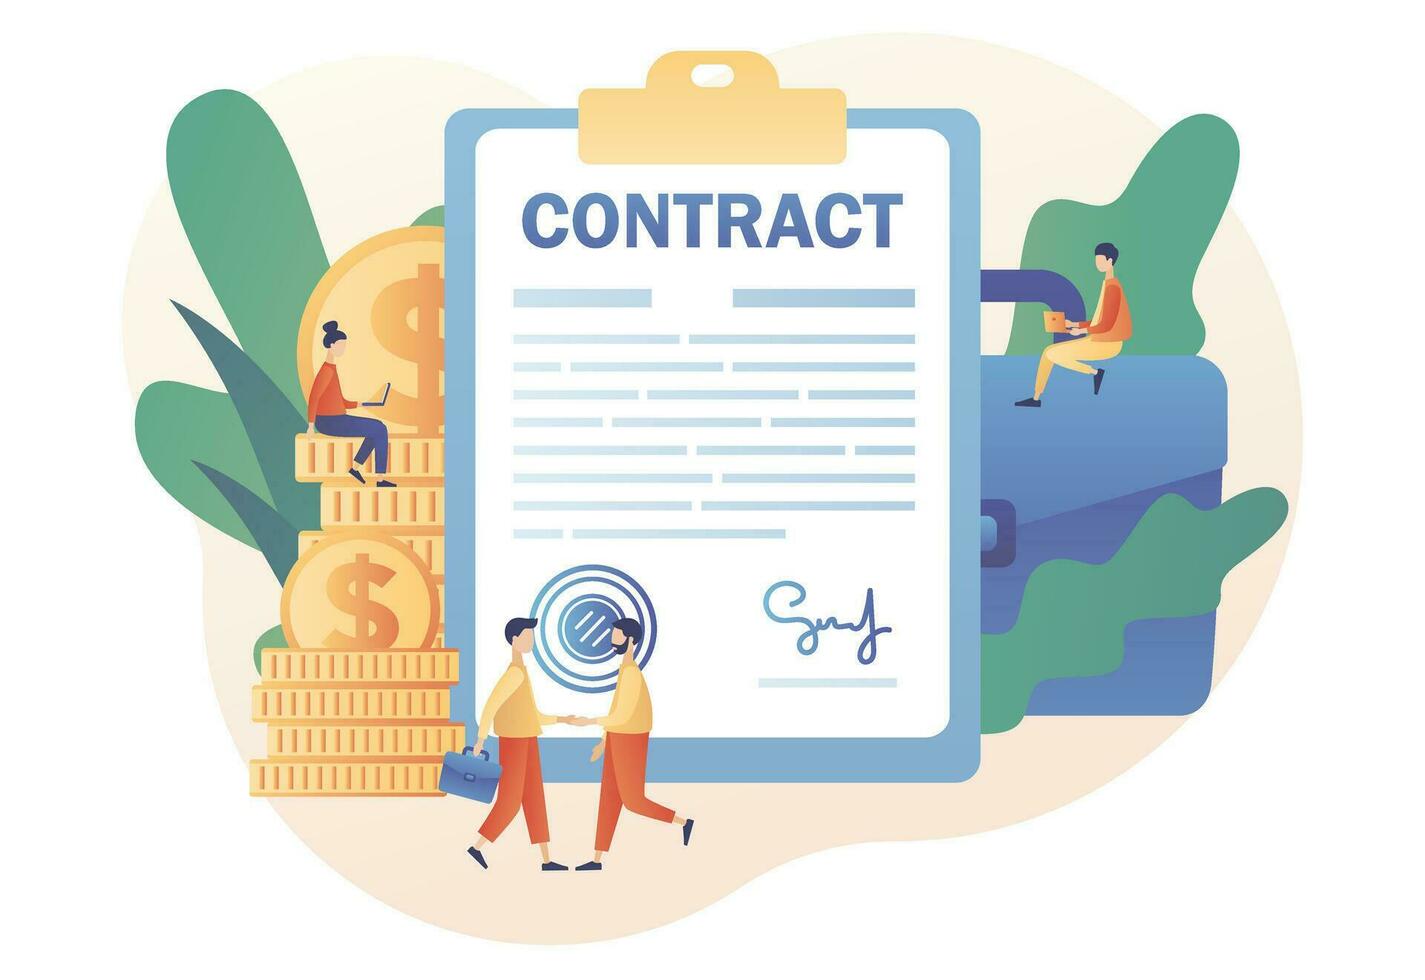 Contract concept. Tiny business people shaking hands and signing agreement, legal document or contract online. Digital signature. Modern flat cartoon style. Vector illustration on white background